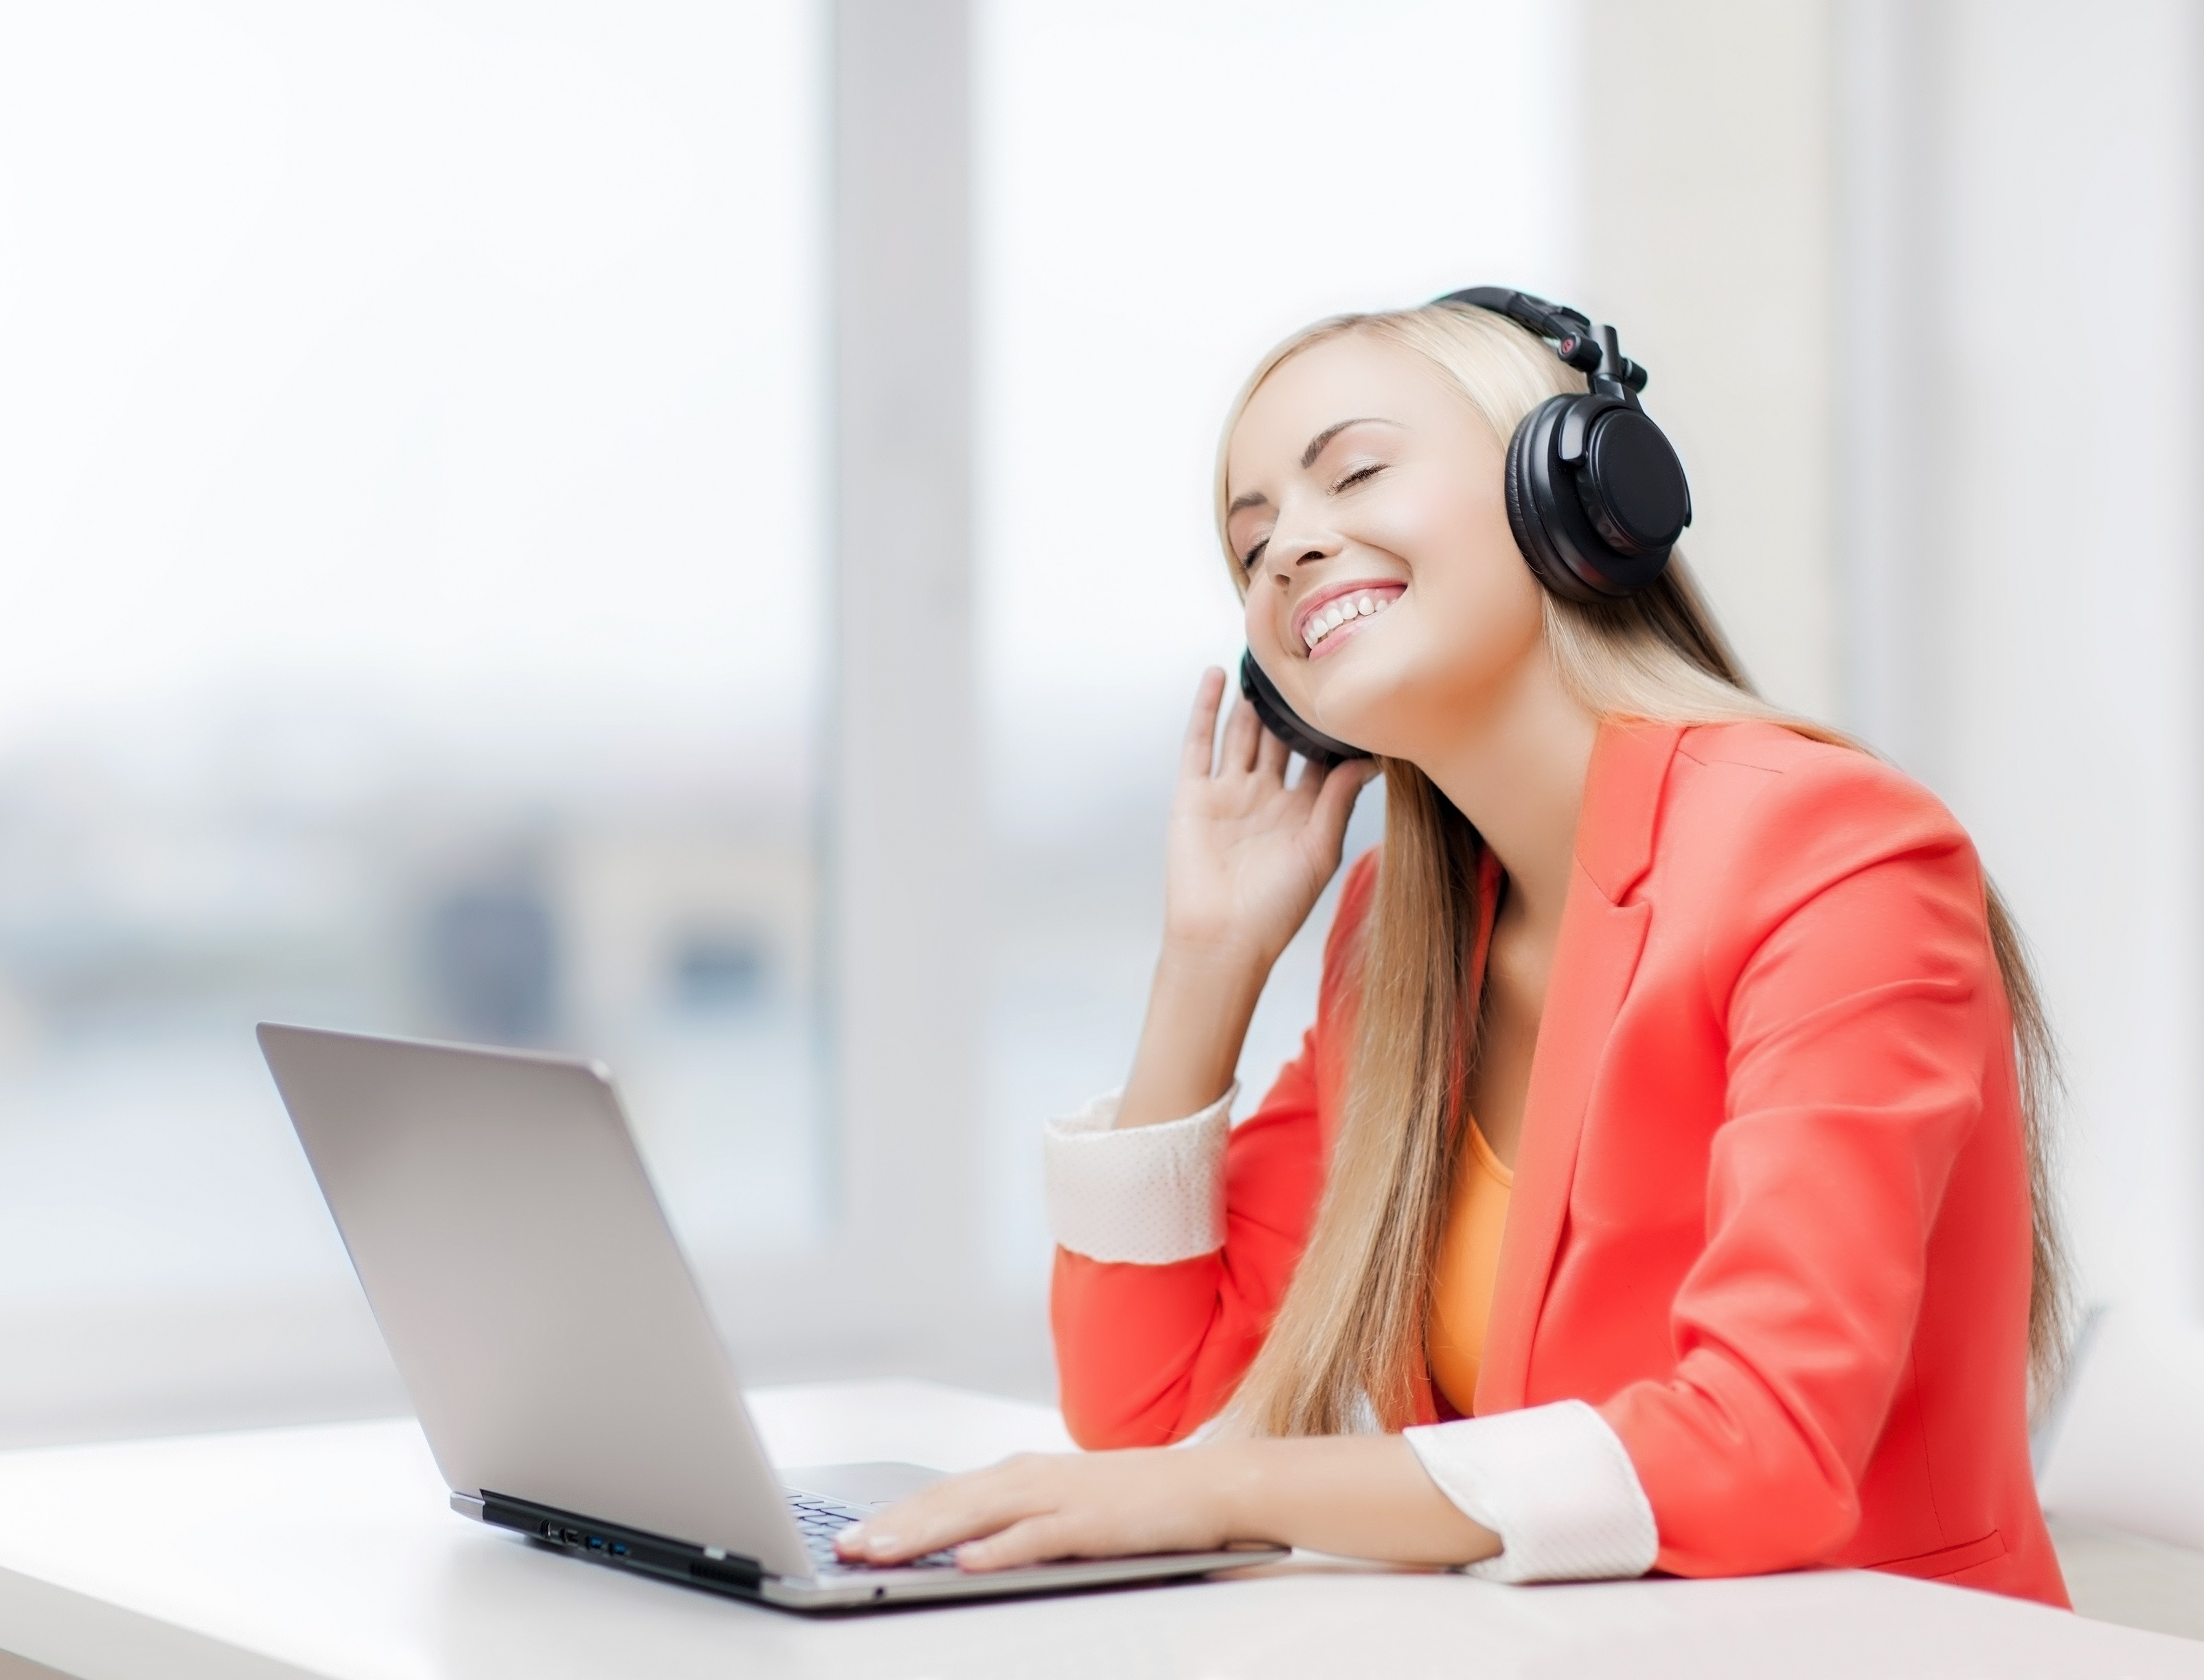 Music increases productivity at work